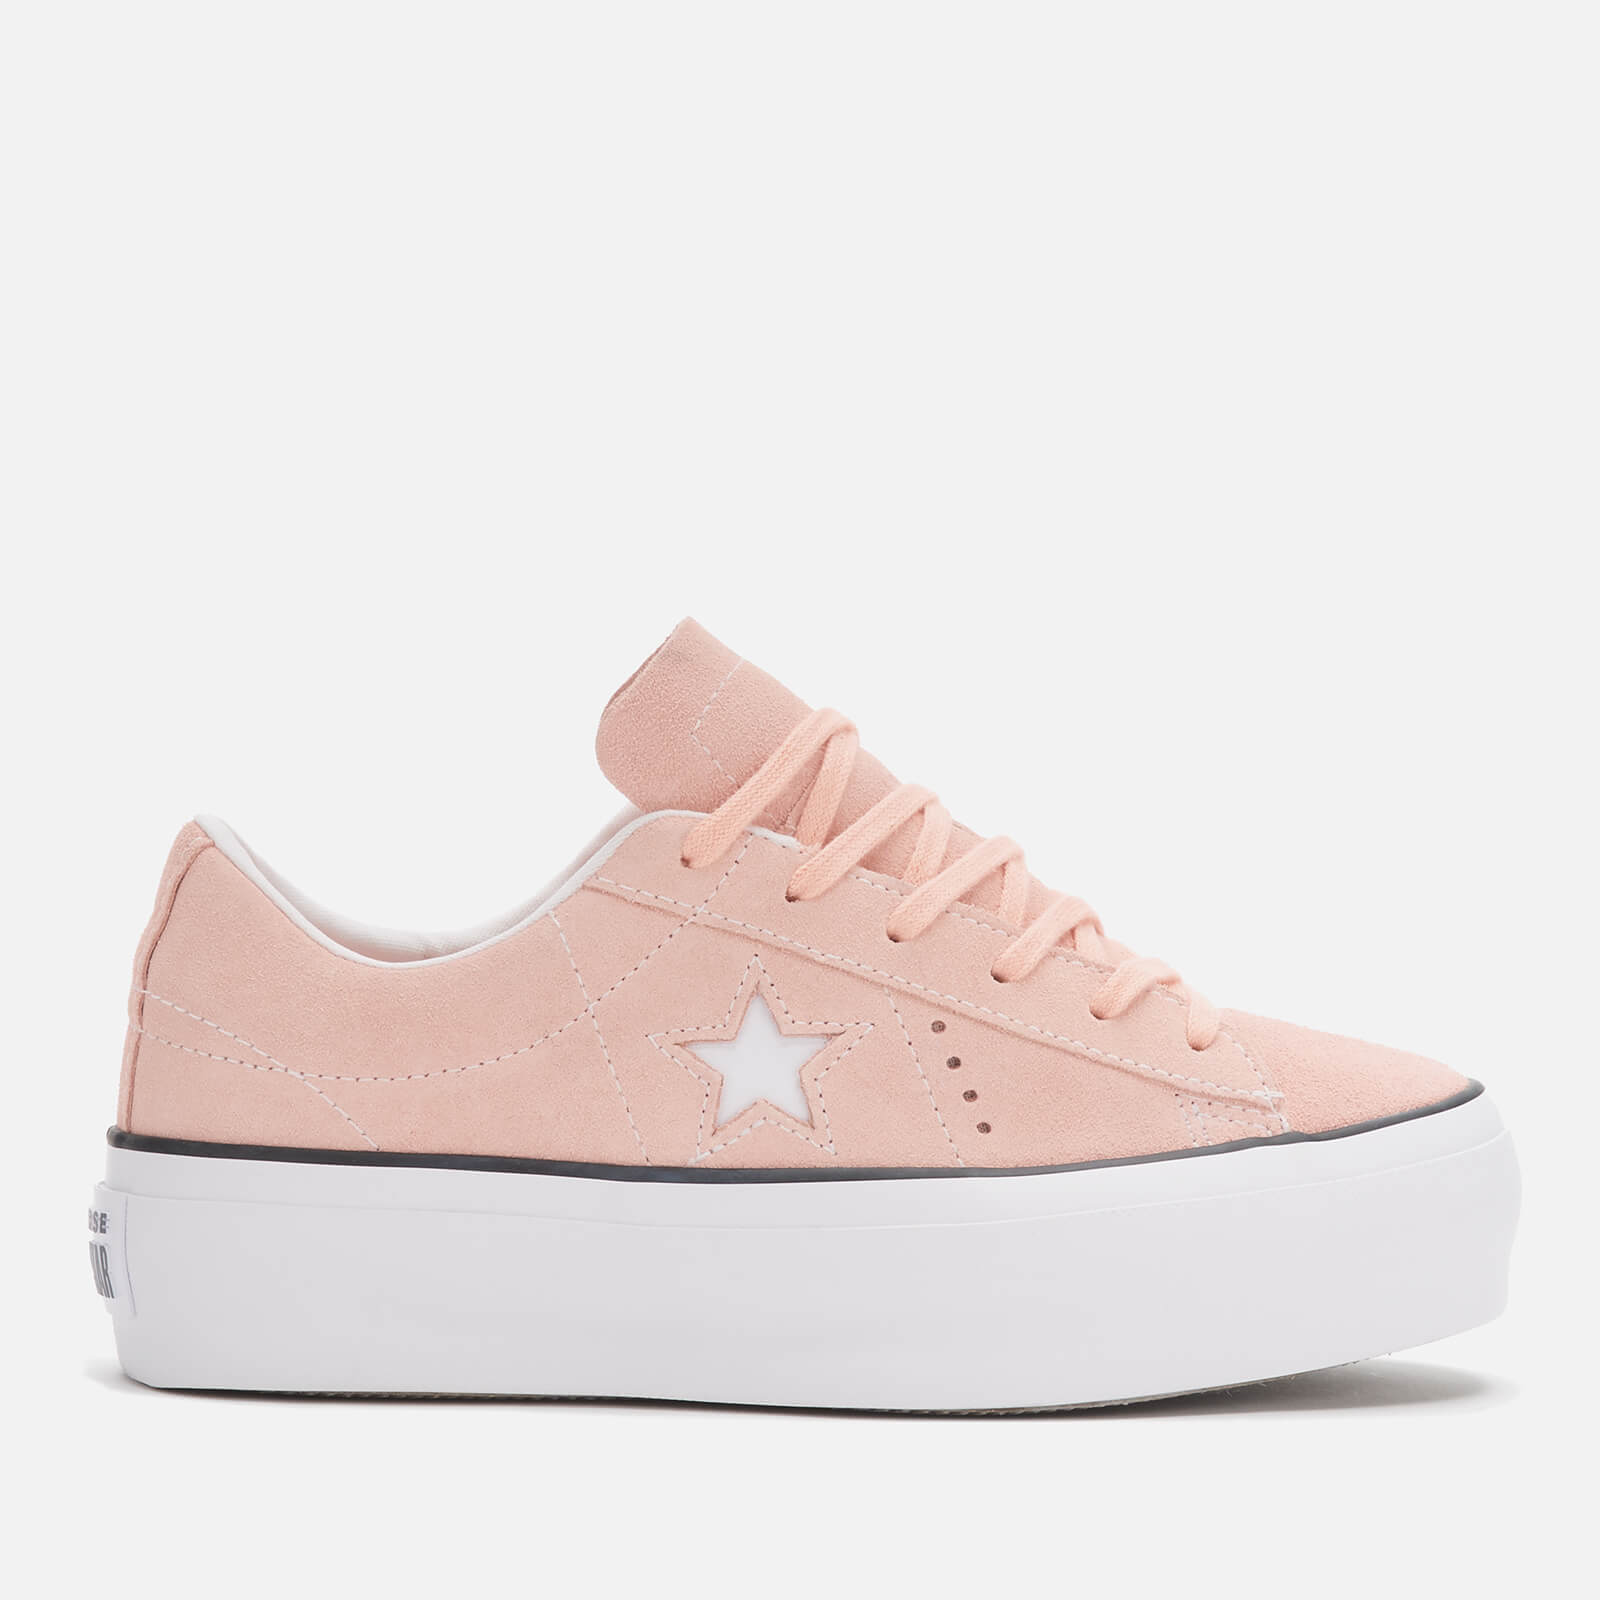 Converse Women's One Star Platform Ox Trainers - Bleached Coral/Black/White - UK 4 - Pink